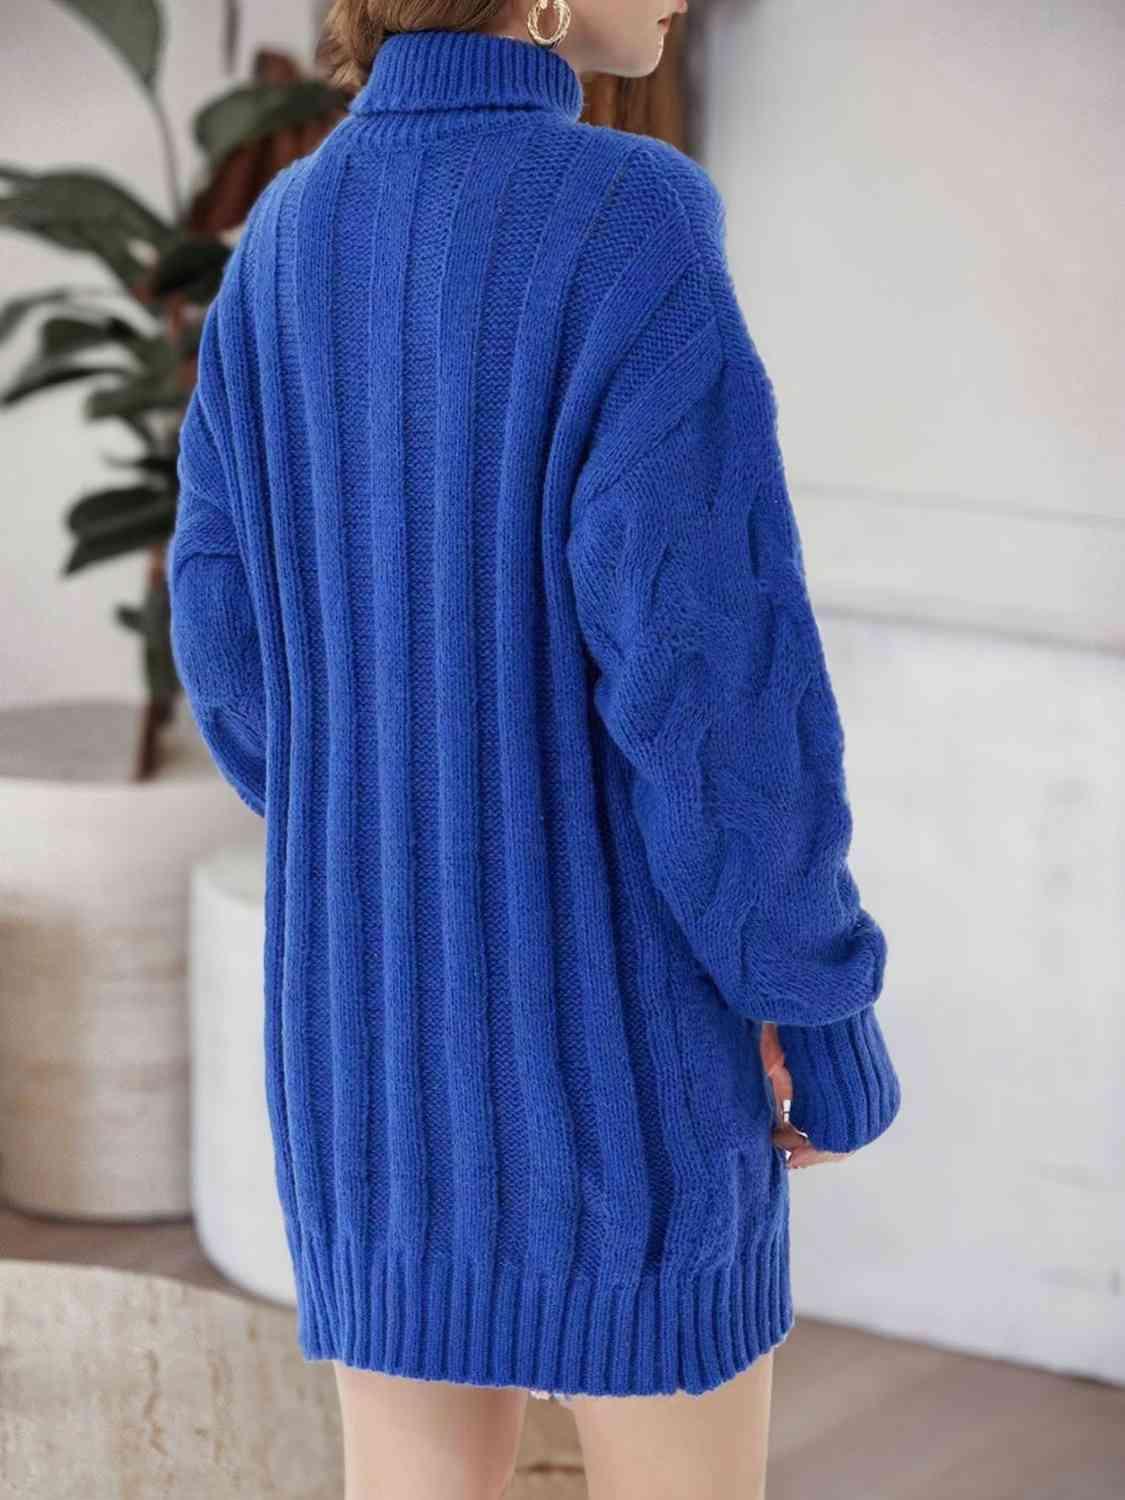 Sleigh The Day Cable Knit Turtleneck Sweater Dress-MXSTUDIO.COM